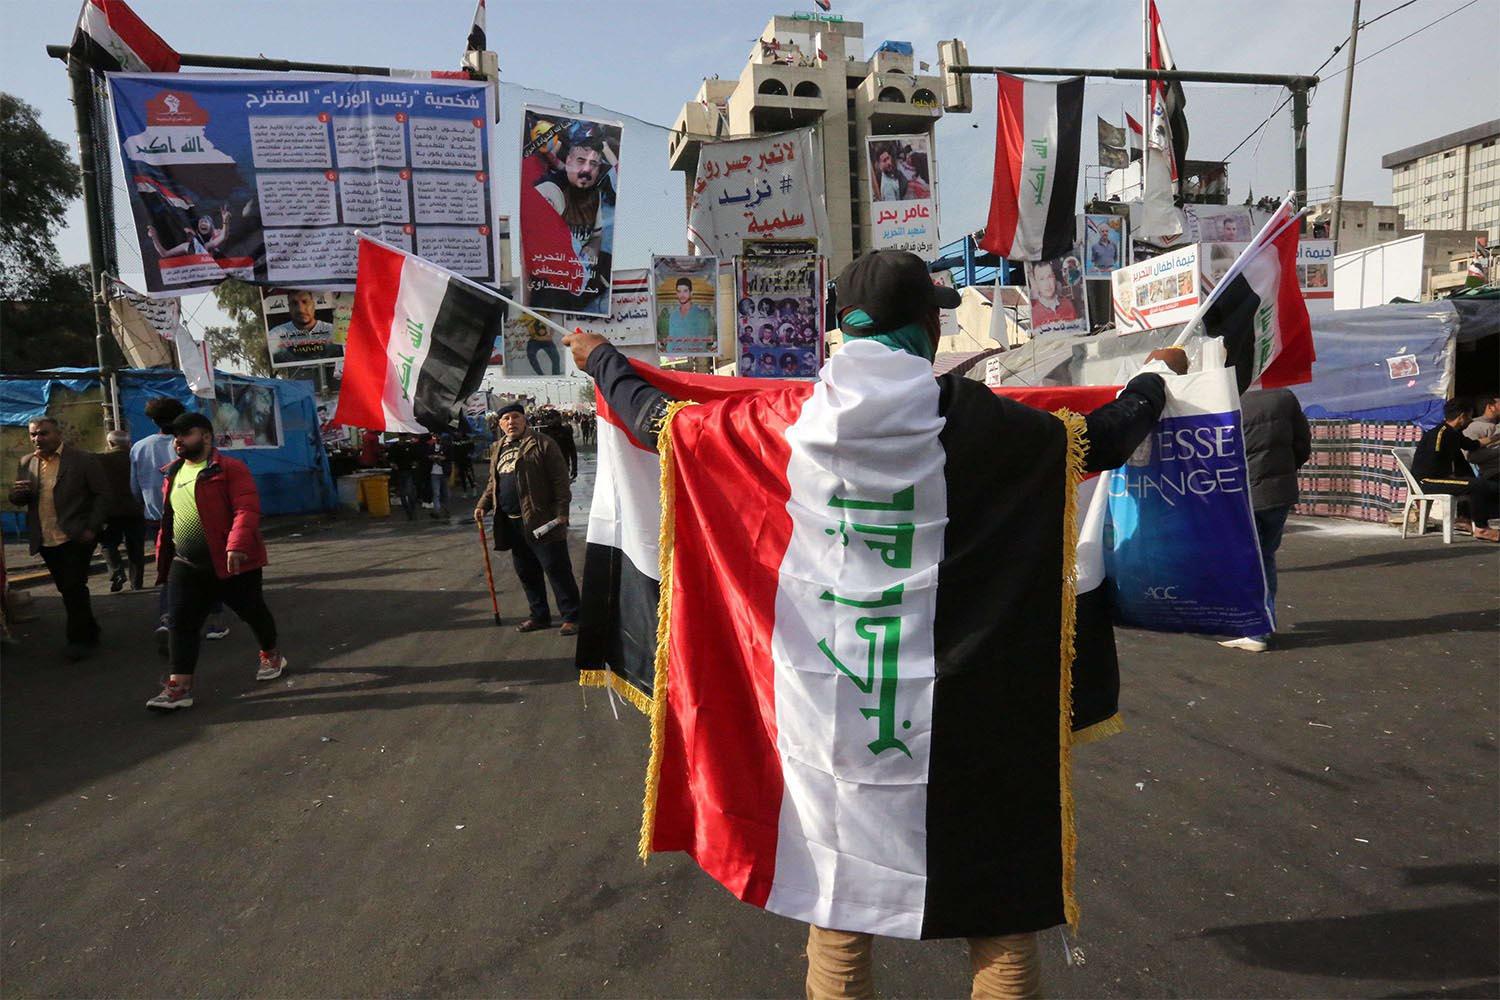 An Iraqi protester clad with the national flag takes part in anti-government protests at Tahrir square in Baghdad